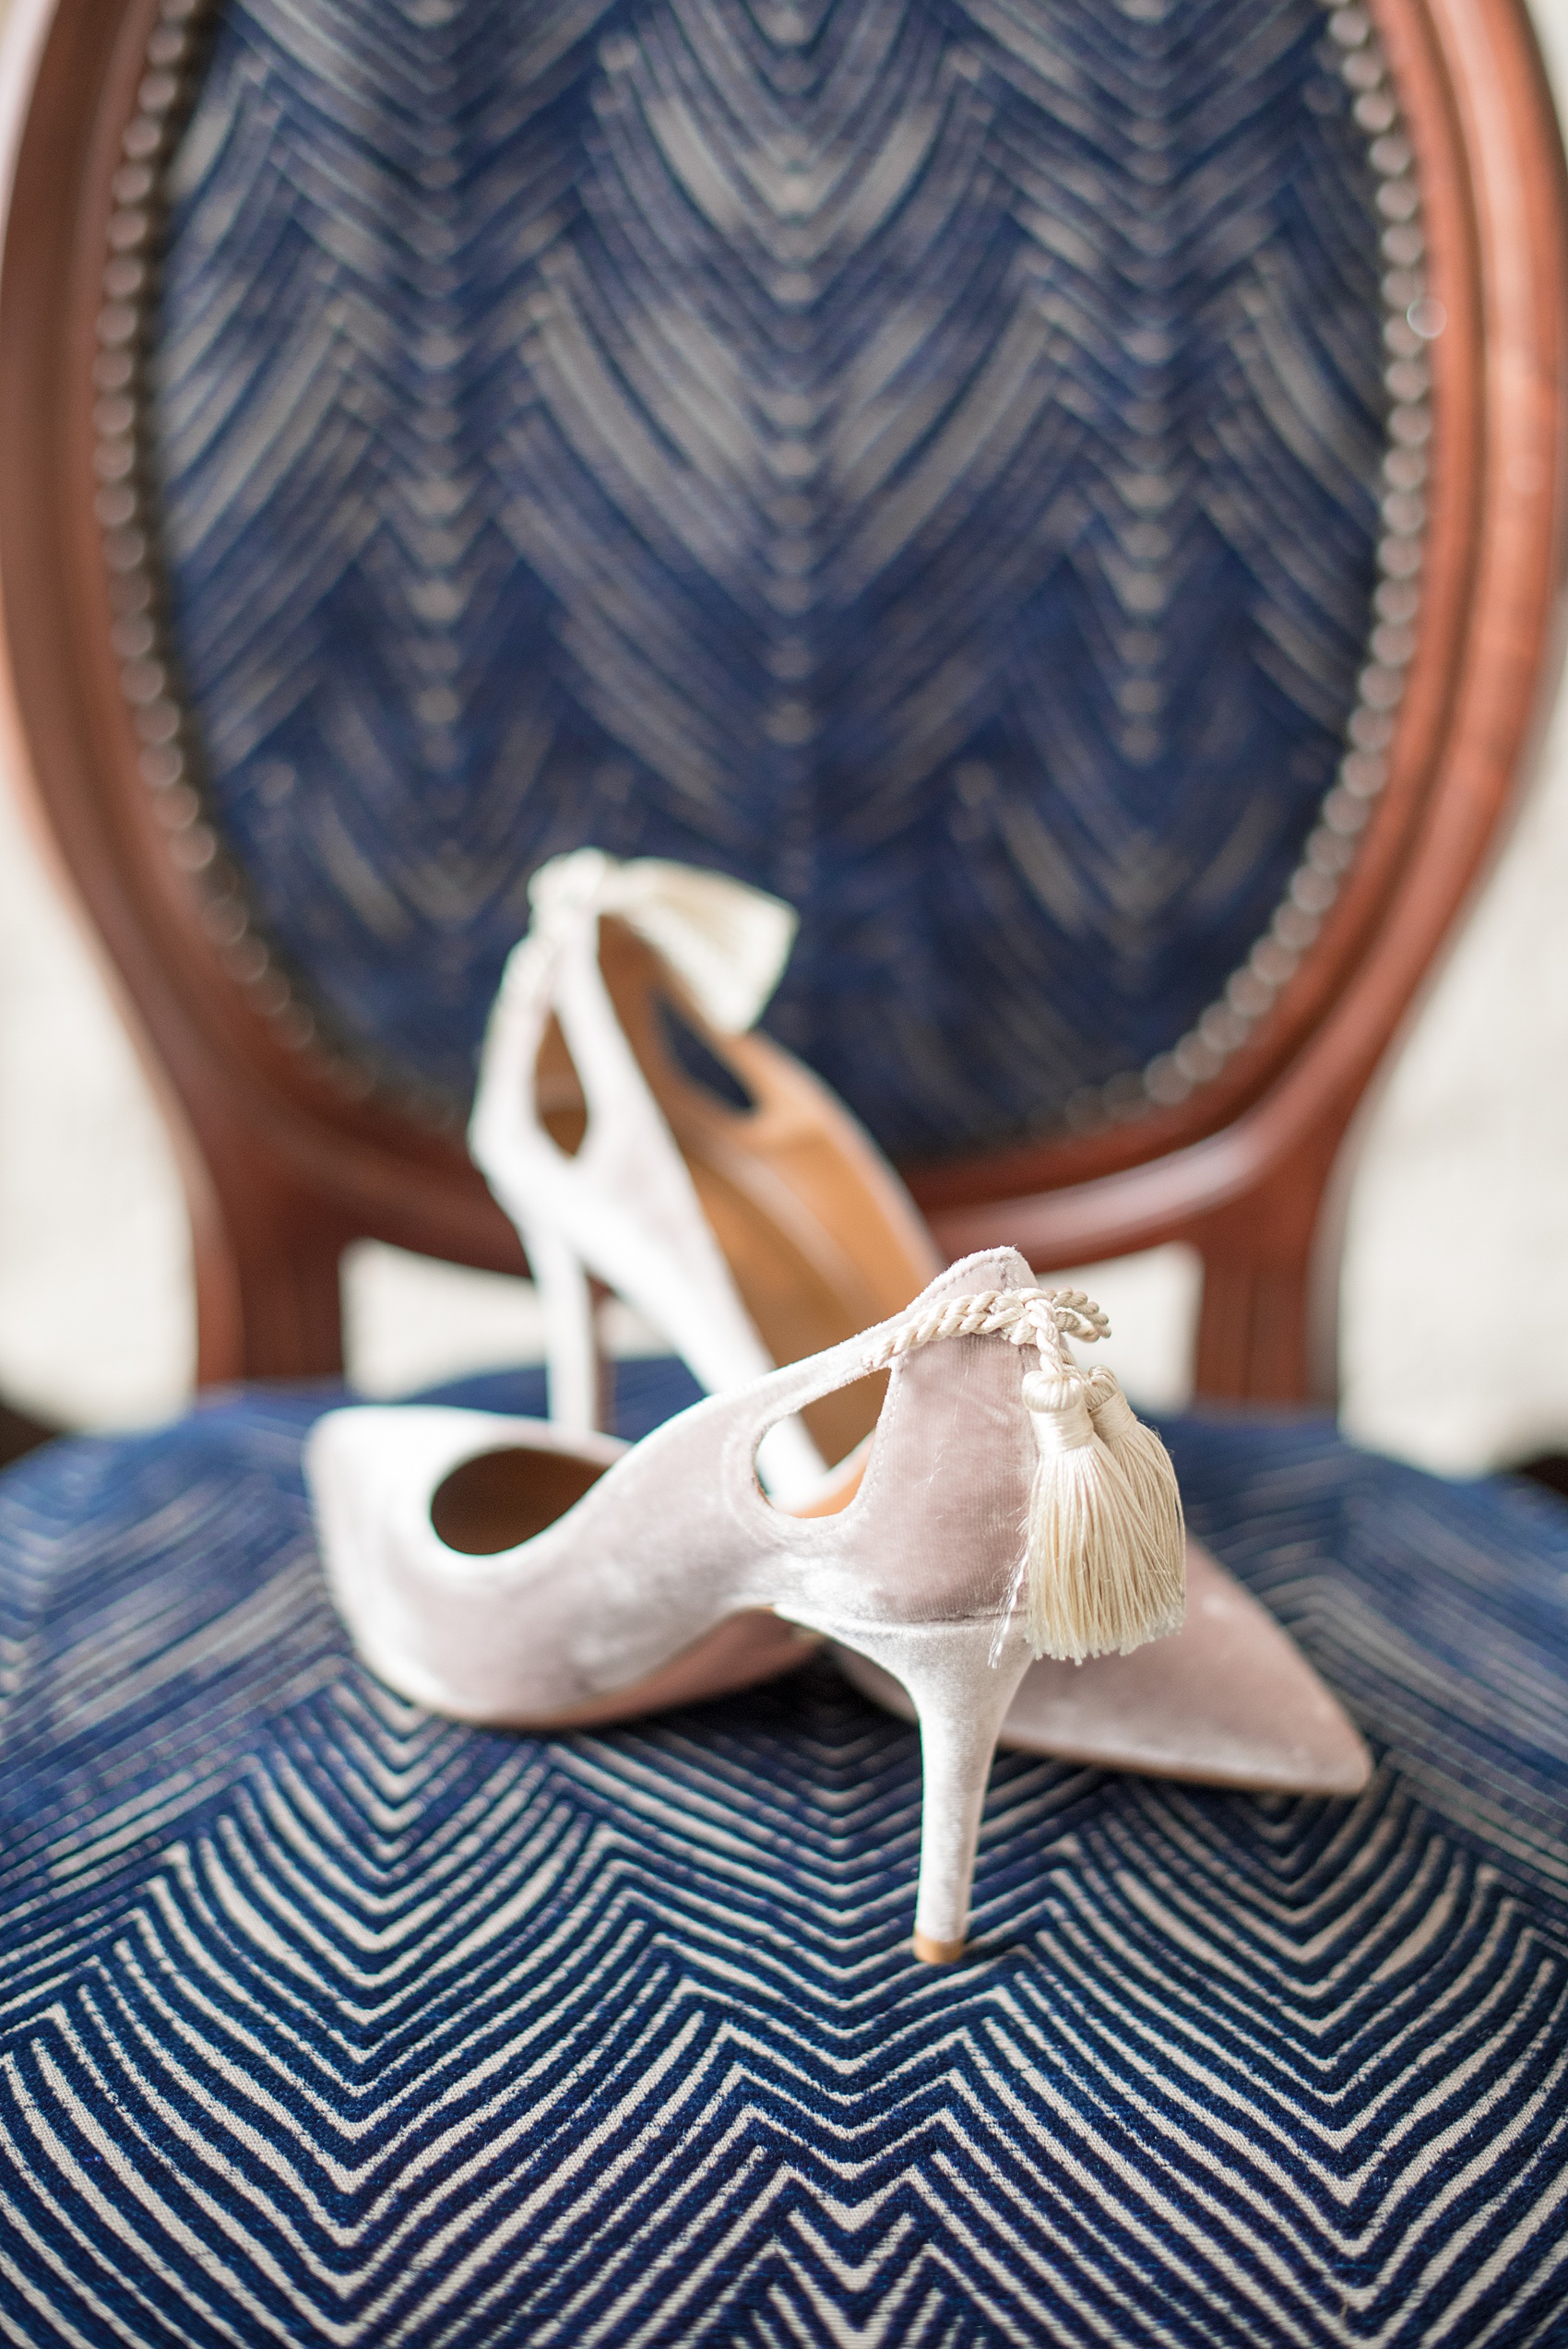 Winter wedding photos at Sleepy Hollow Country Club, New York about an hour from NYC, by Mikkel Paige Photography. Detail picture of the bride's unique tan velvet heels with a tassel on the back. #winterwedding #NYweddingphotos #SleepyHollowNY